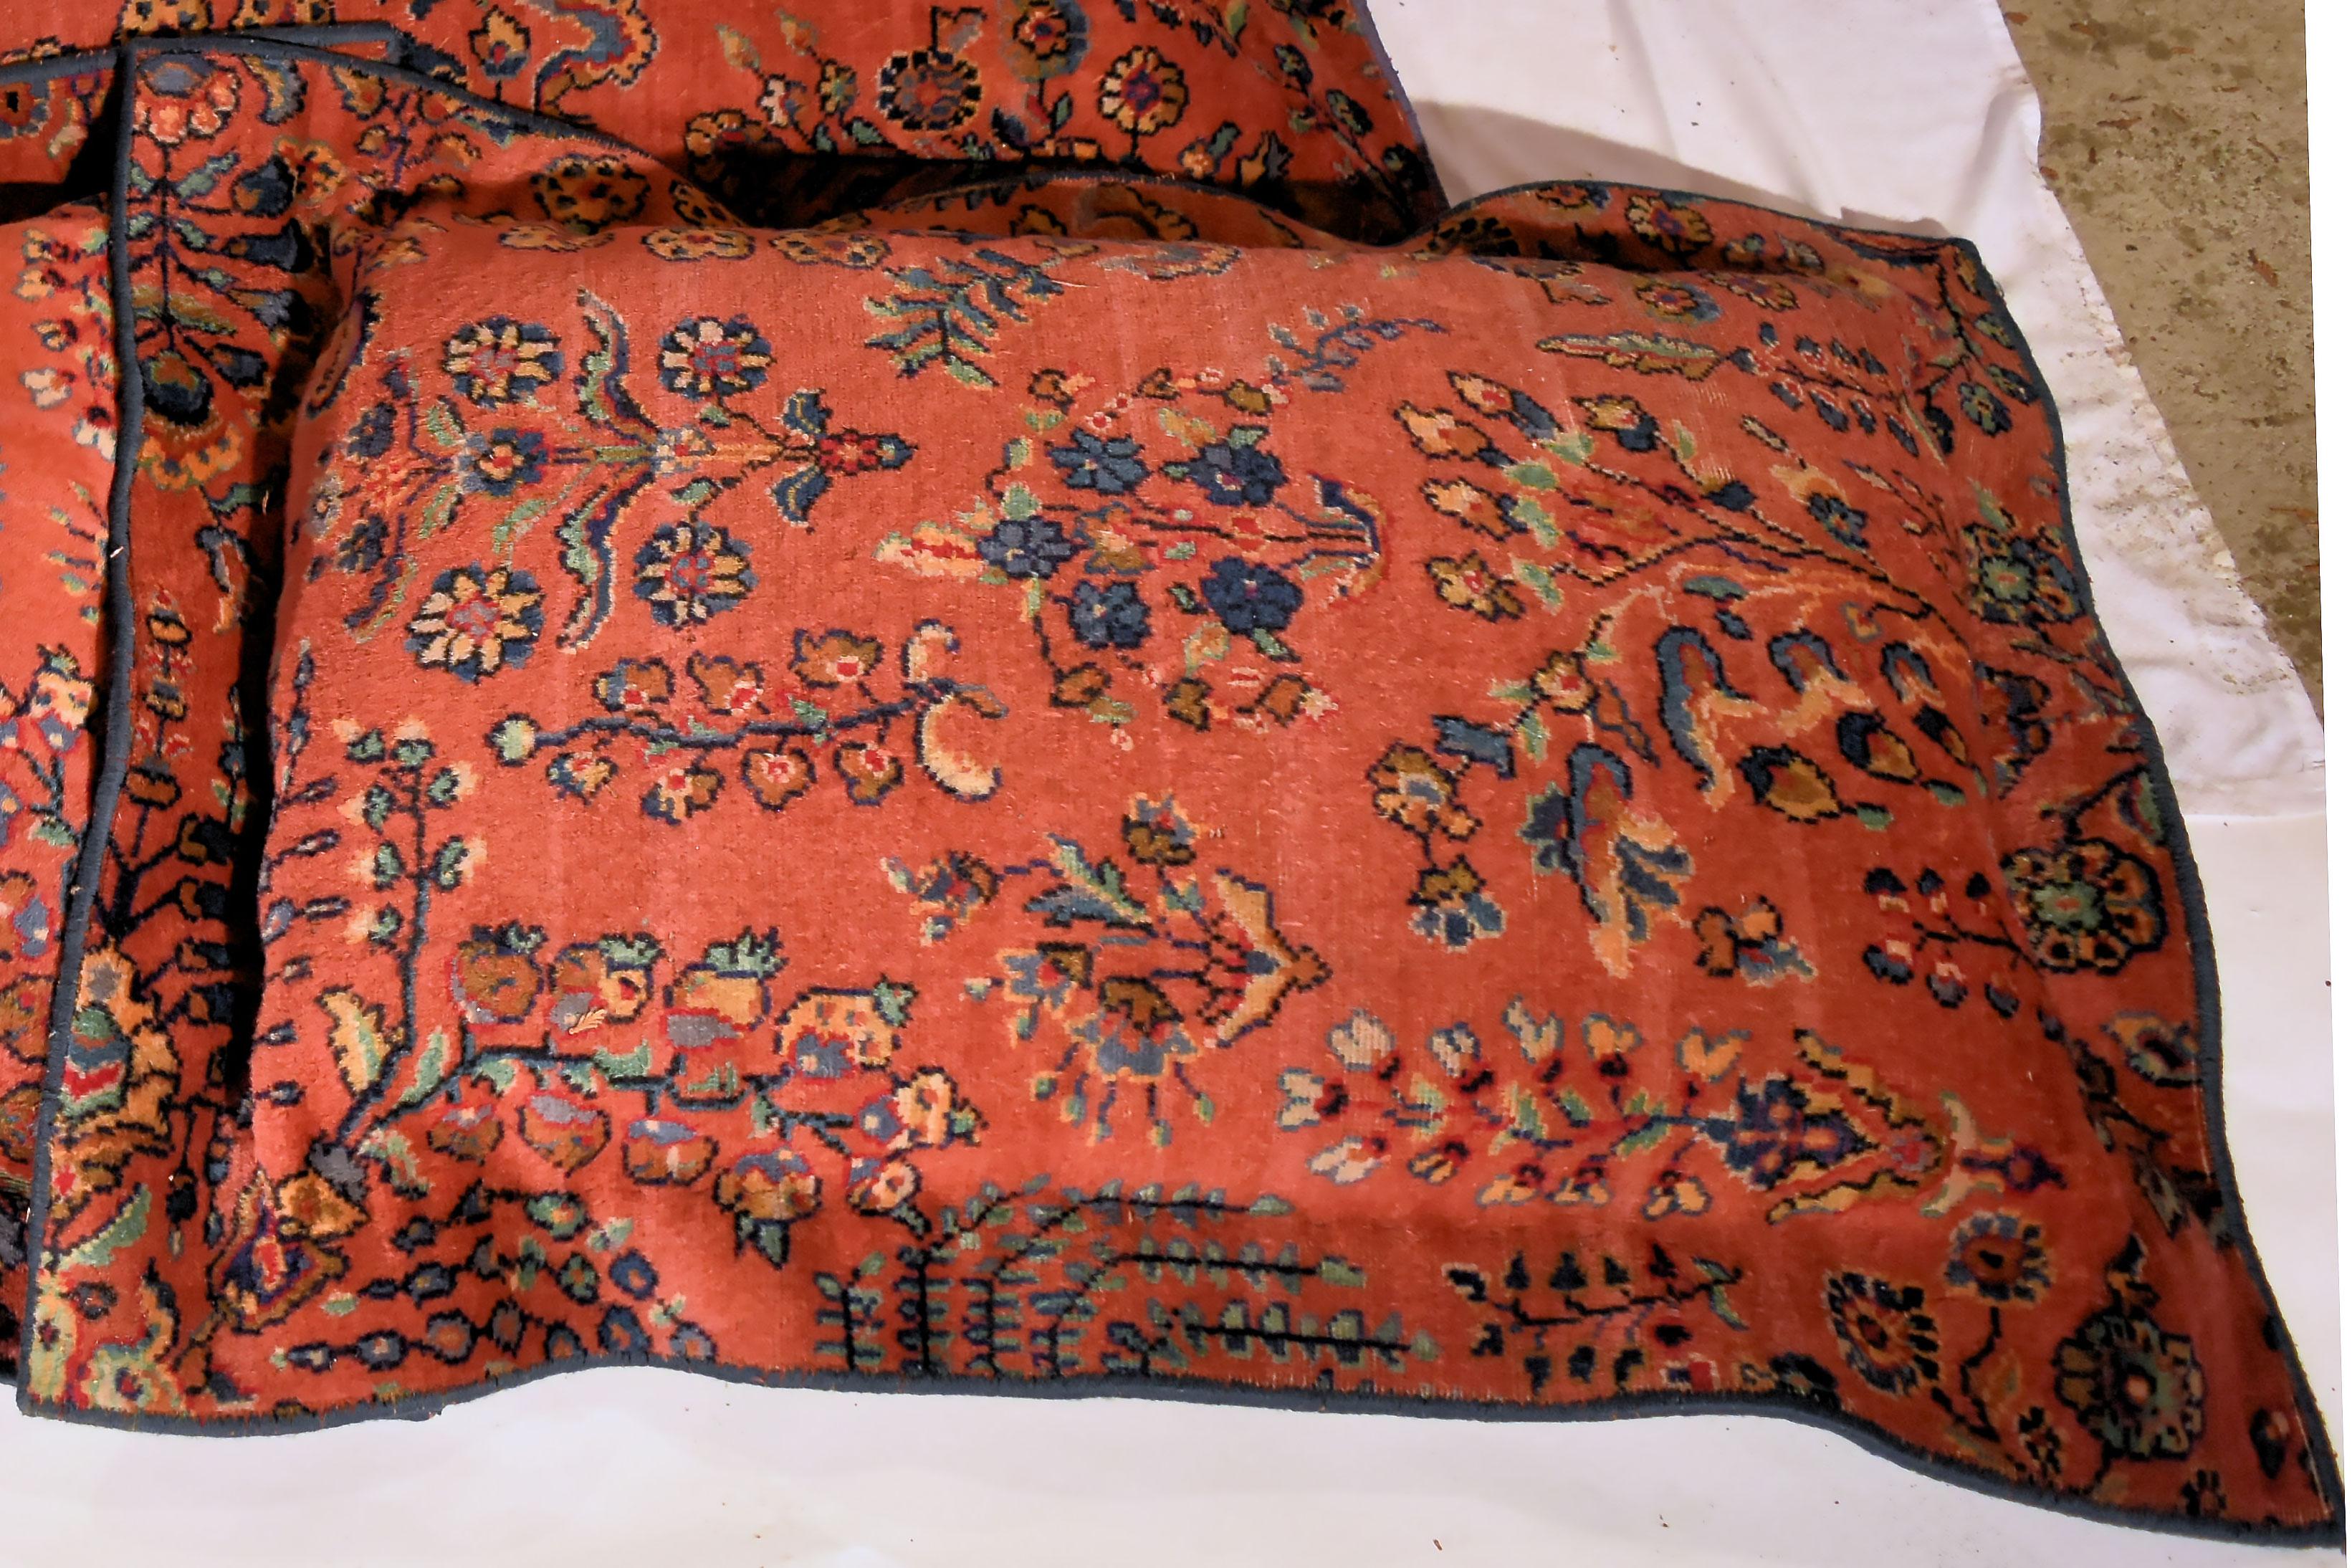 East Asian Vintage Large Wool Rug Pillows, Mid-20th Century, Chinese Rug Fragment